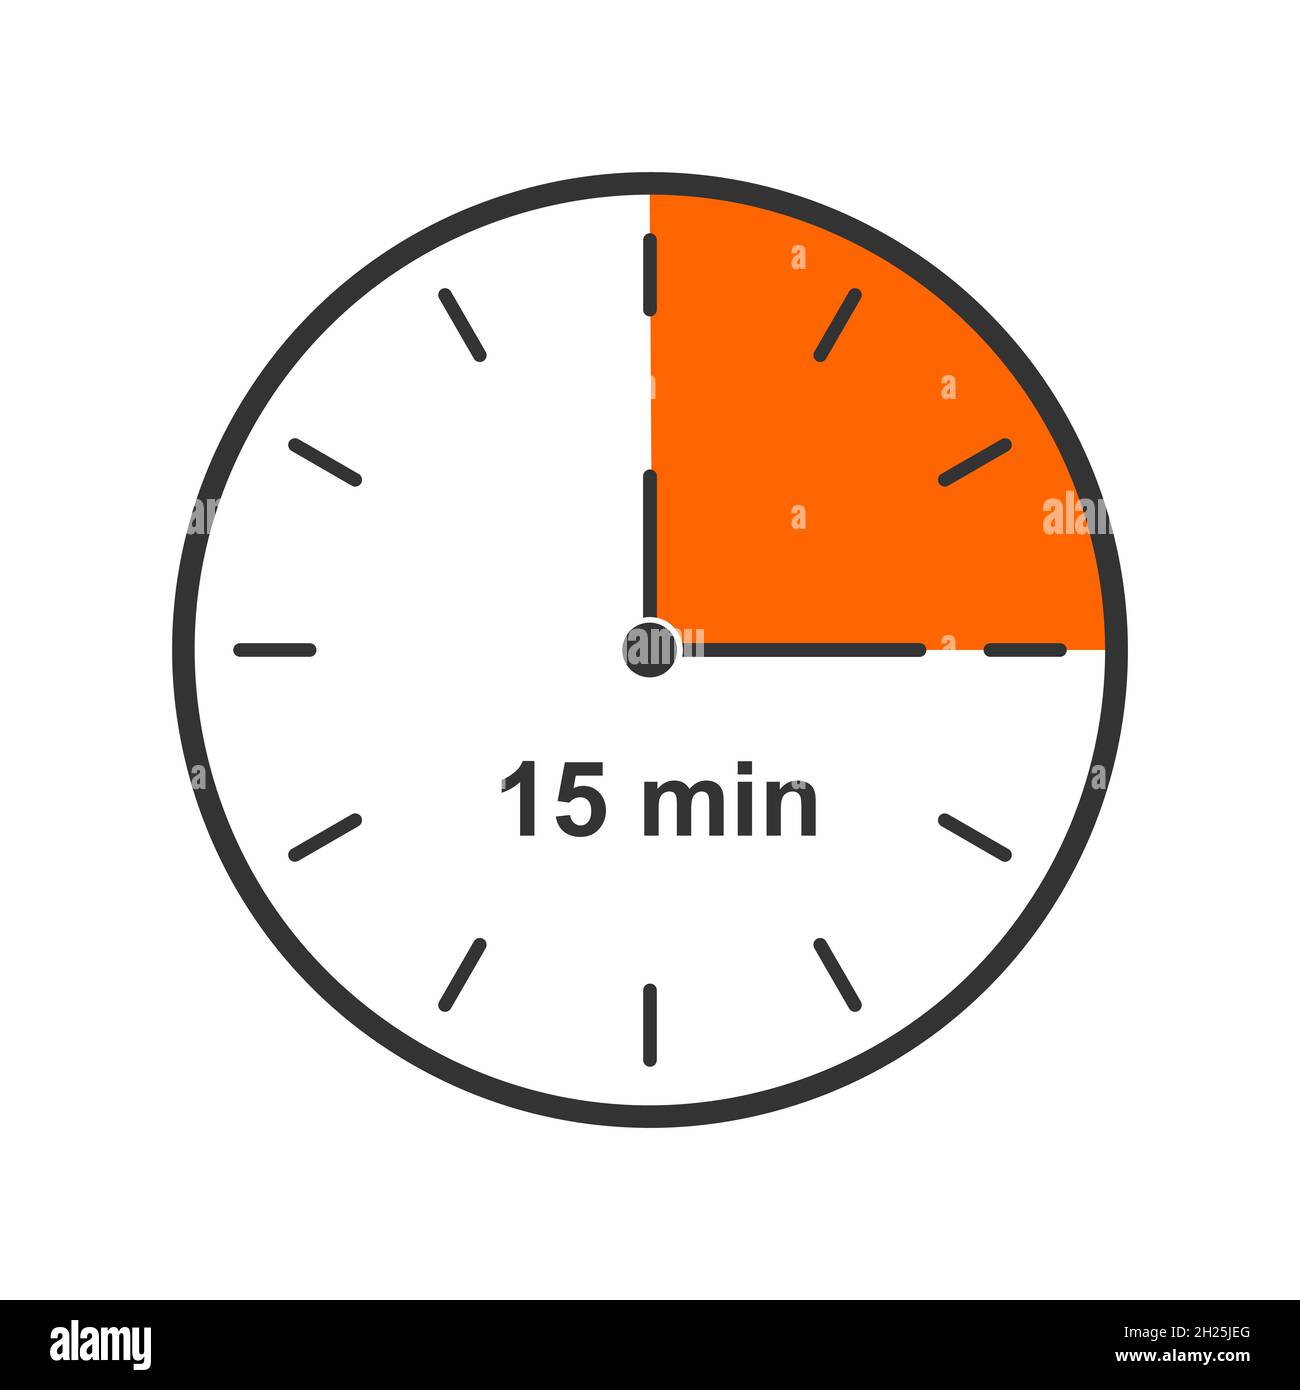 Clock icon with 15 minute time Quarter of hour. Countdown timer or stopwatch symbol isolated on background. Infographic element for cooking or sport game. Vector flat illustration Stock Vector Image